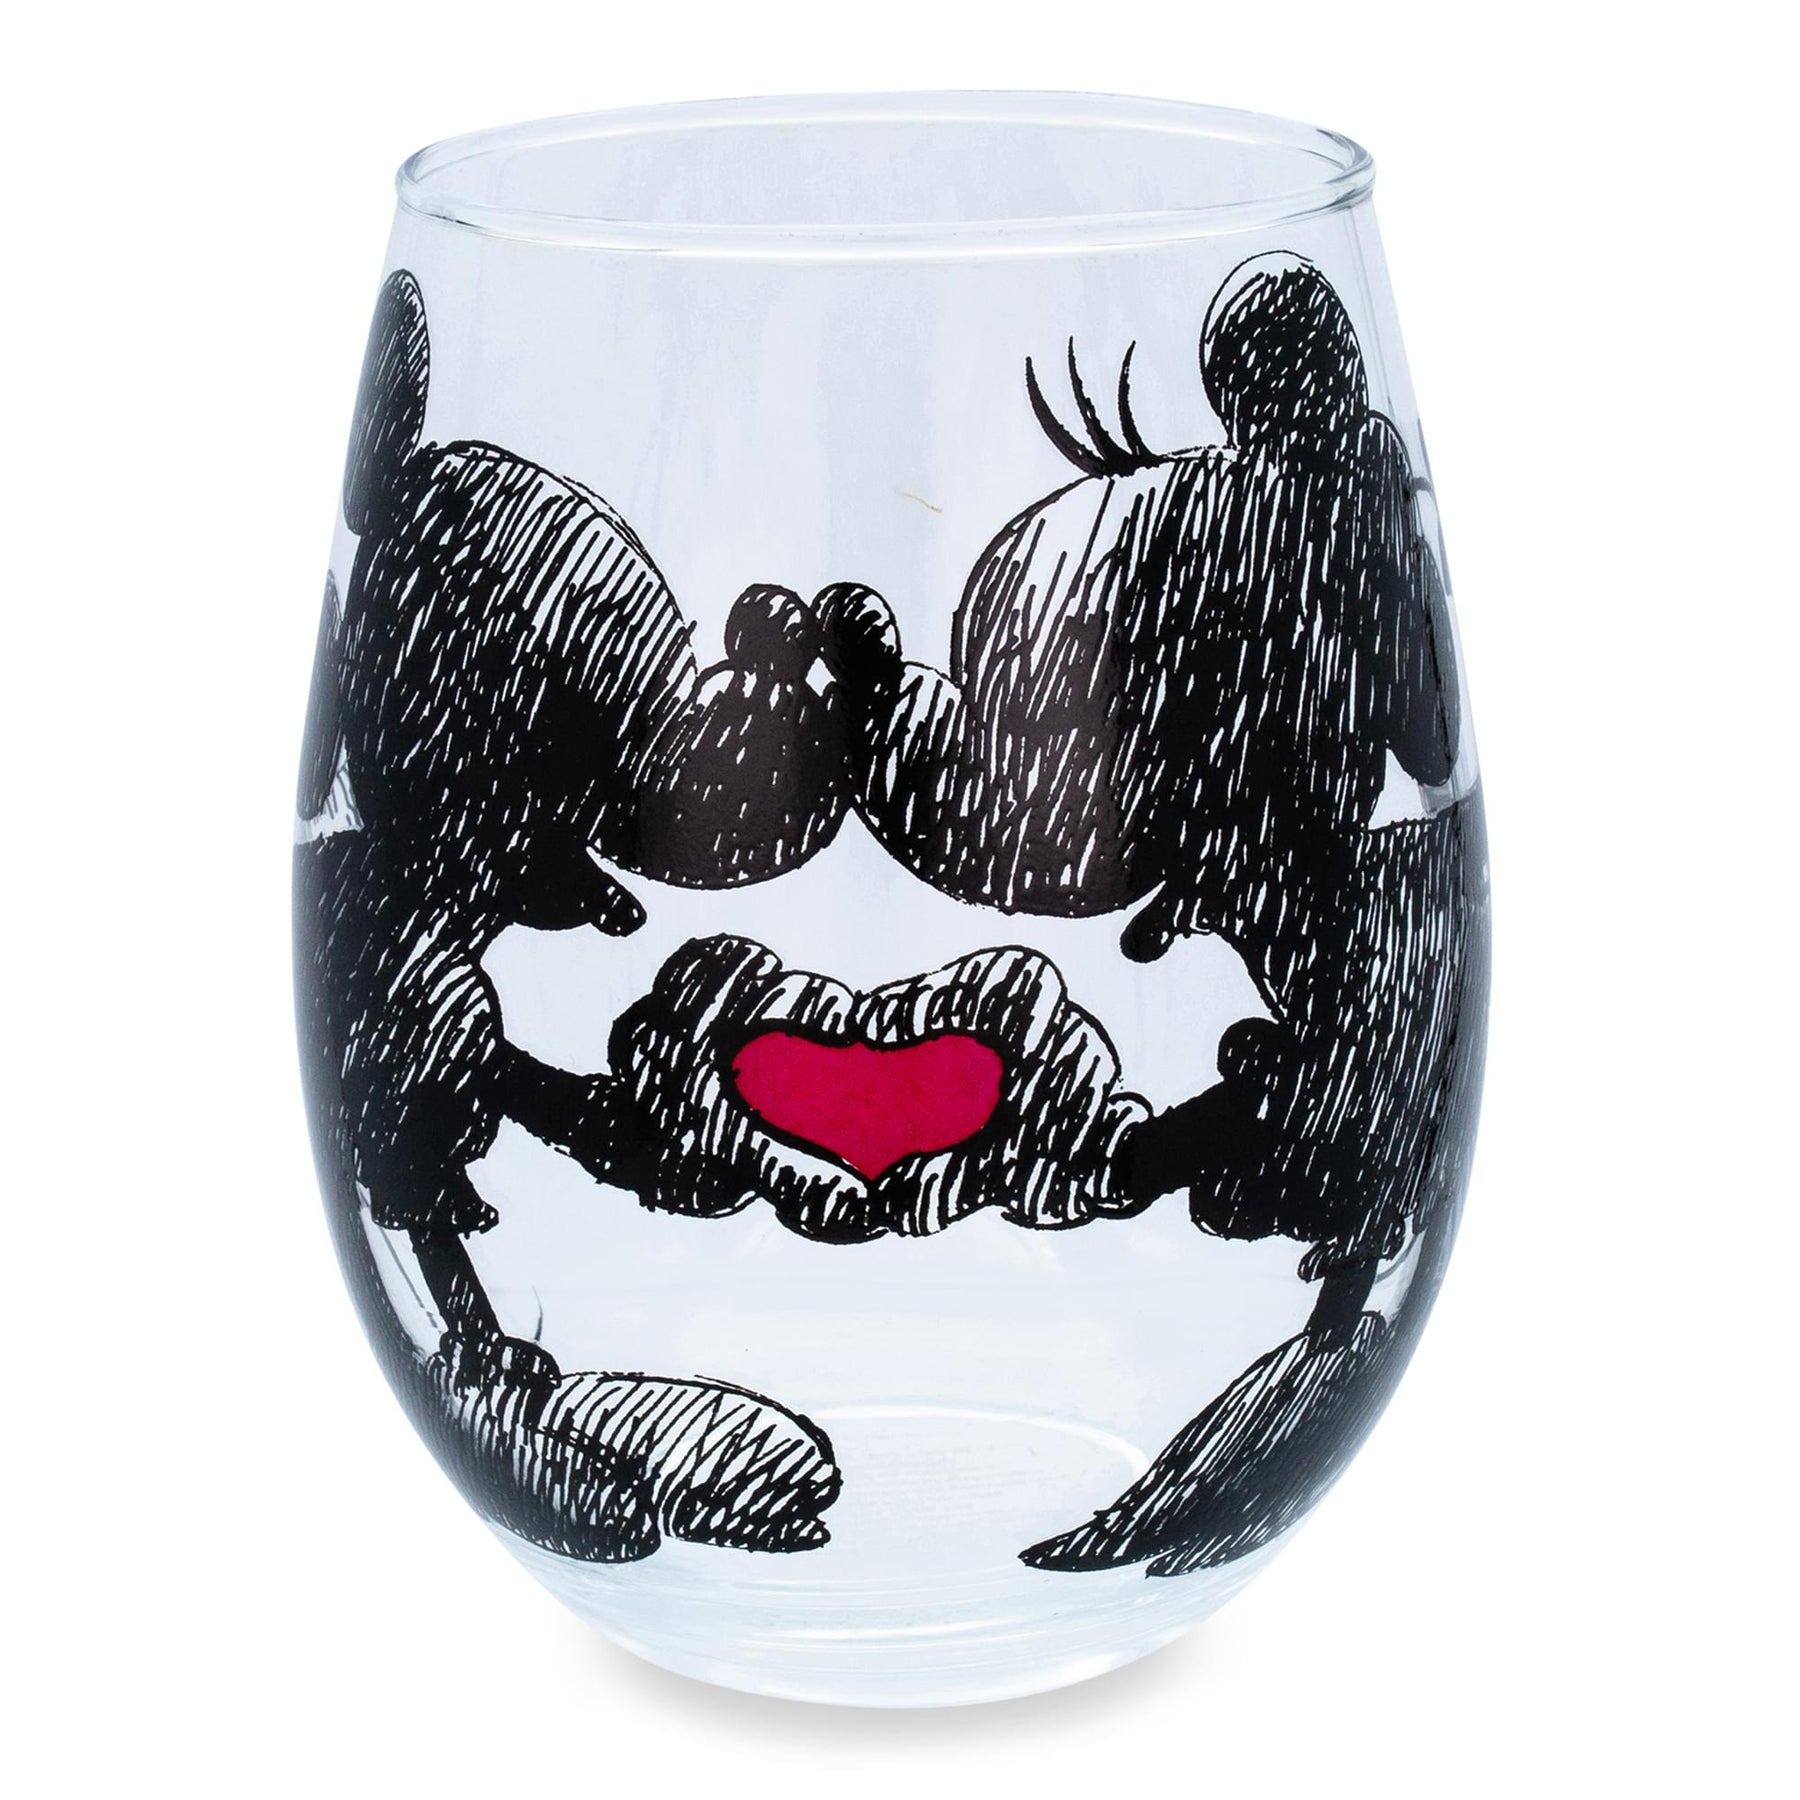 Mickey Minnie Wine Glasses  Mickey Mouse Drinking Glasses